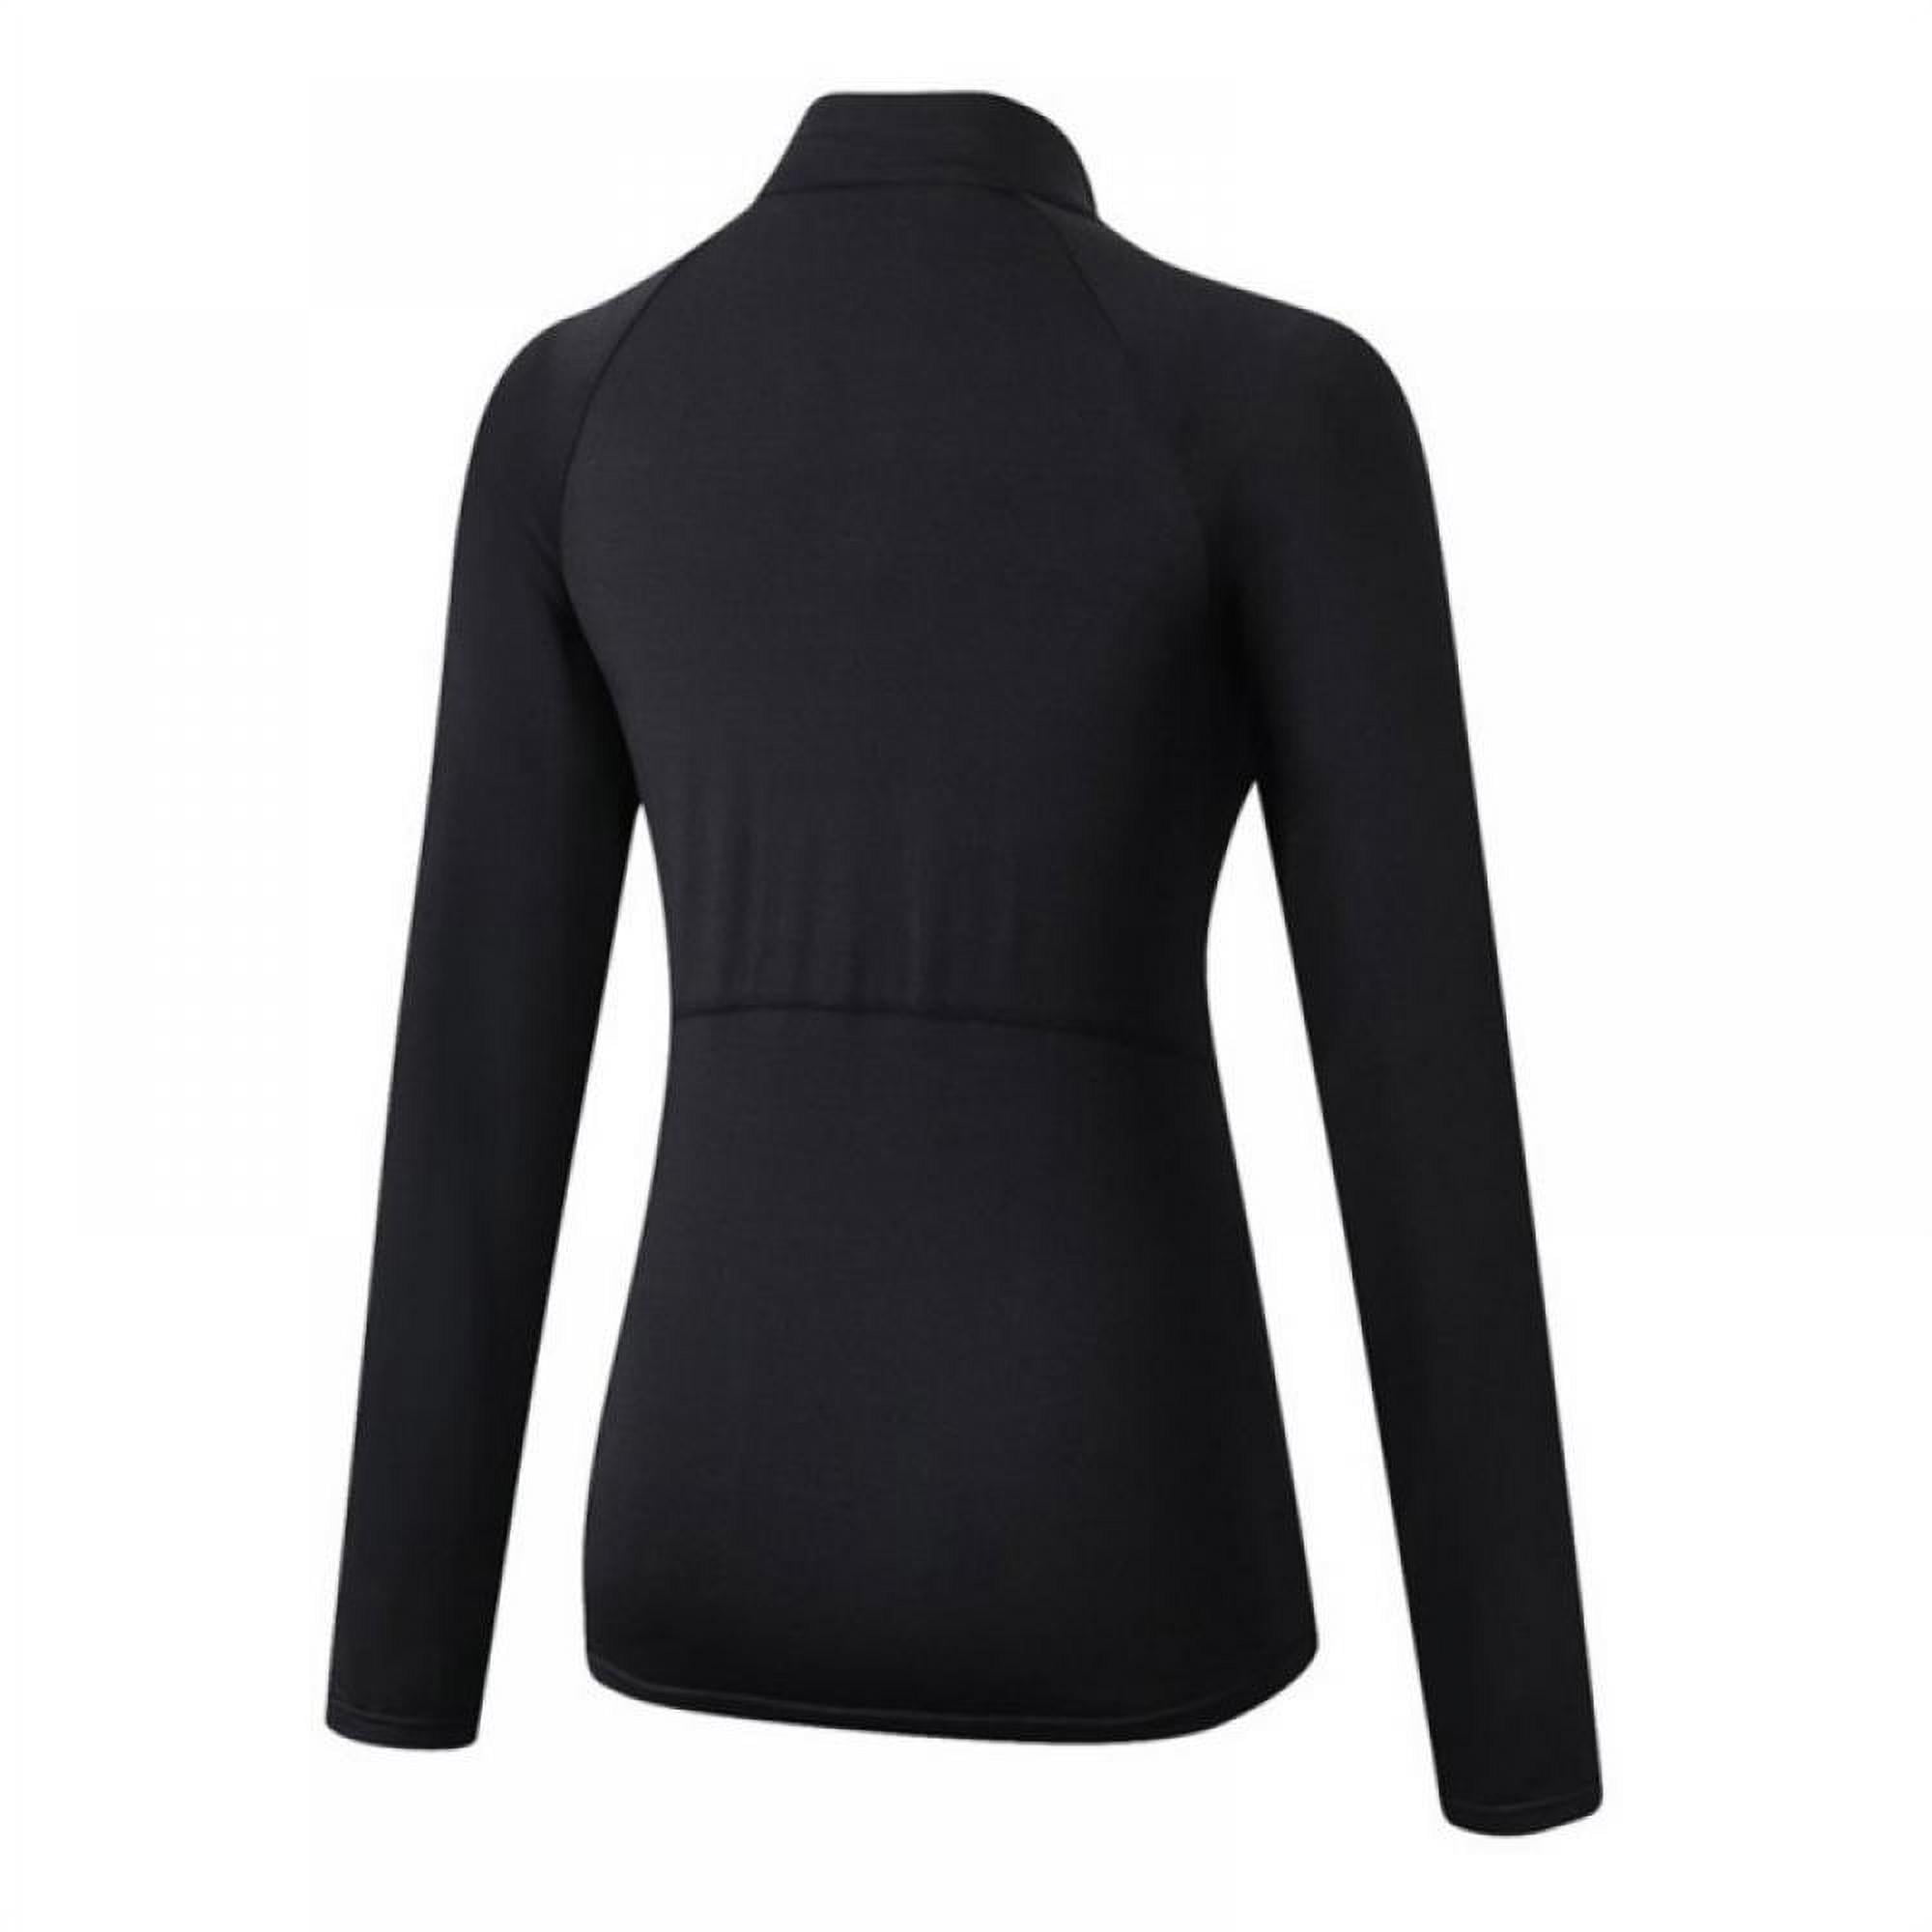  BALEAF Women's Long Sleeve Running Shirts Quick Dry Lightweight  Pullover Workout Tops Athletic T-Shirts Moisture Wicking Hiking Camping  UPF50+ Black Size S : Clothing, Shoes & Jewelry